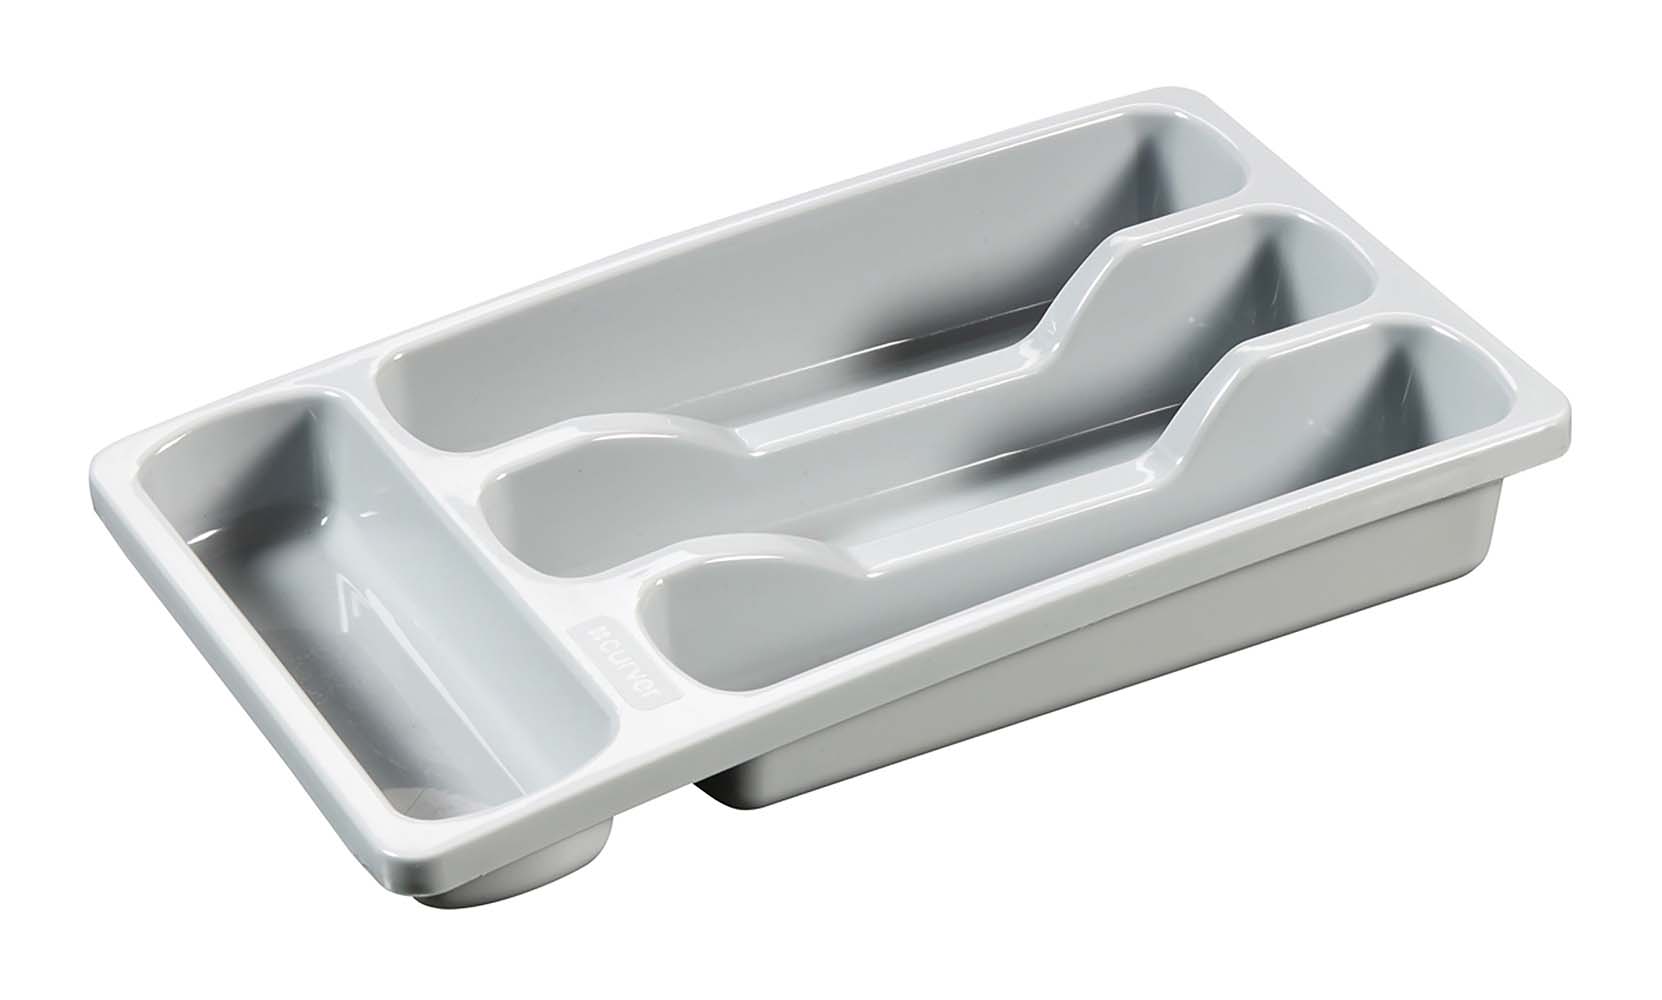 6302100 A compact and sturdy 4-compartment cutlery tray. Ideal to store items compactly. This cutlery tray consists of 3 large compartments and 1 small one.